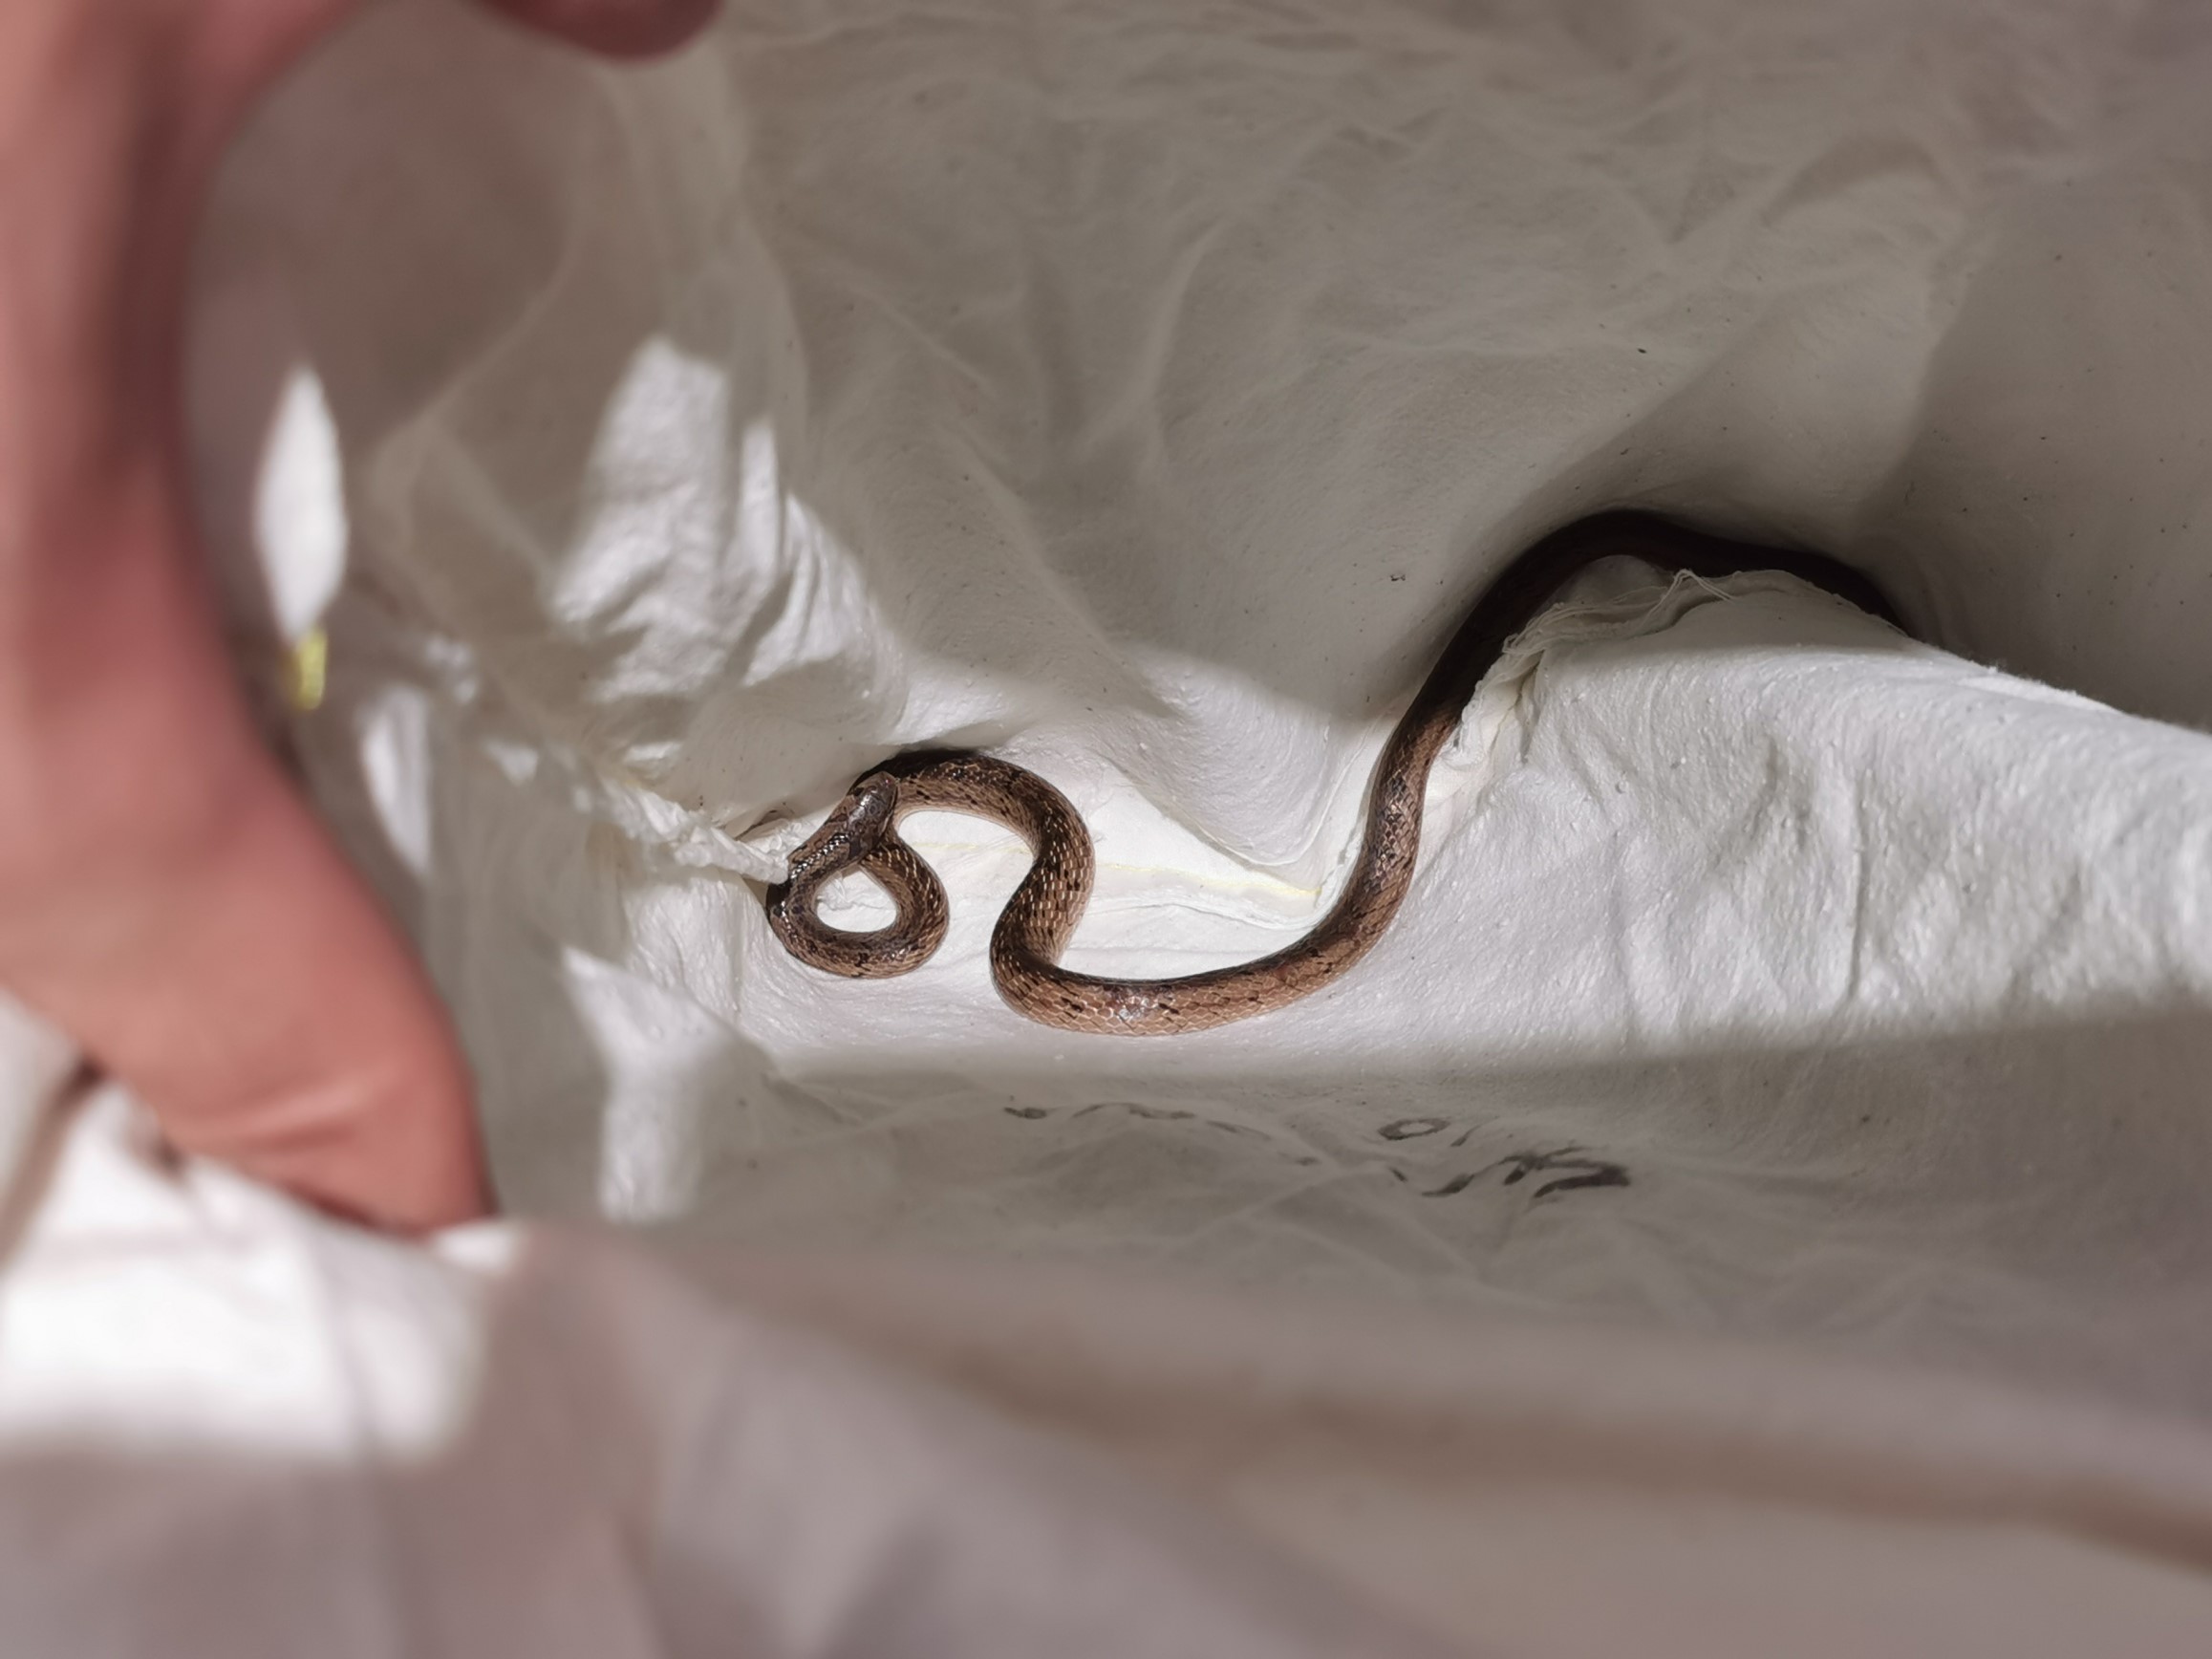 Here is a non-venomous Taiwan kukri snake (Oligodon formosanus) still inside the snake bag in the snake handling room. As this is a healthy native snake, it will be released soon.